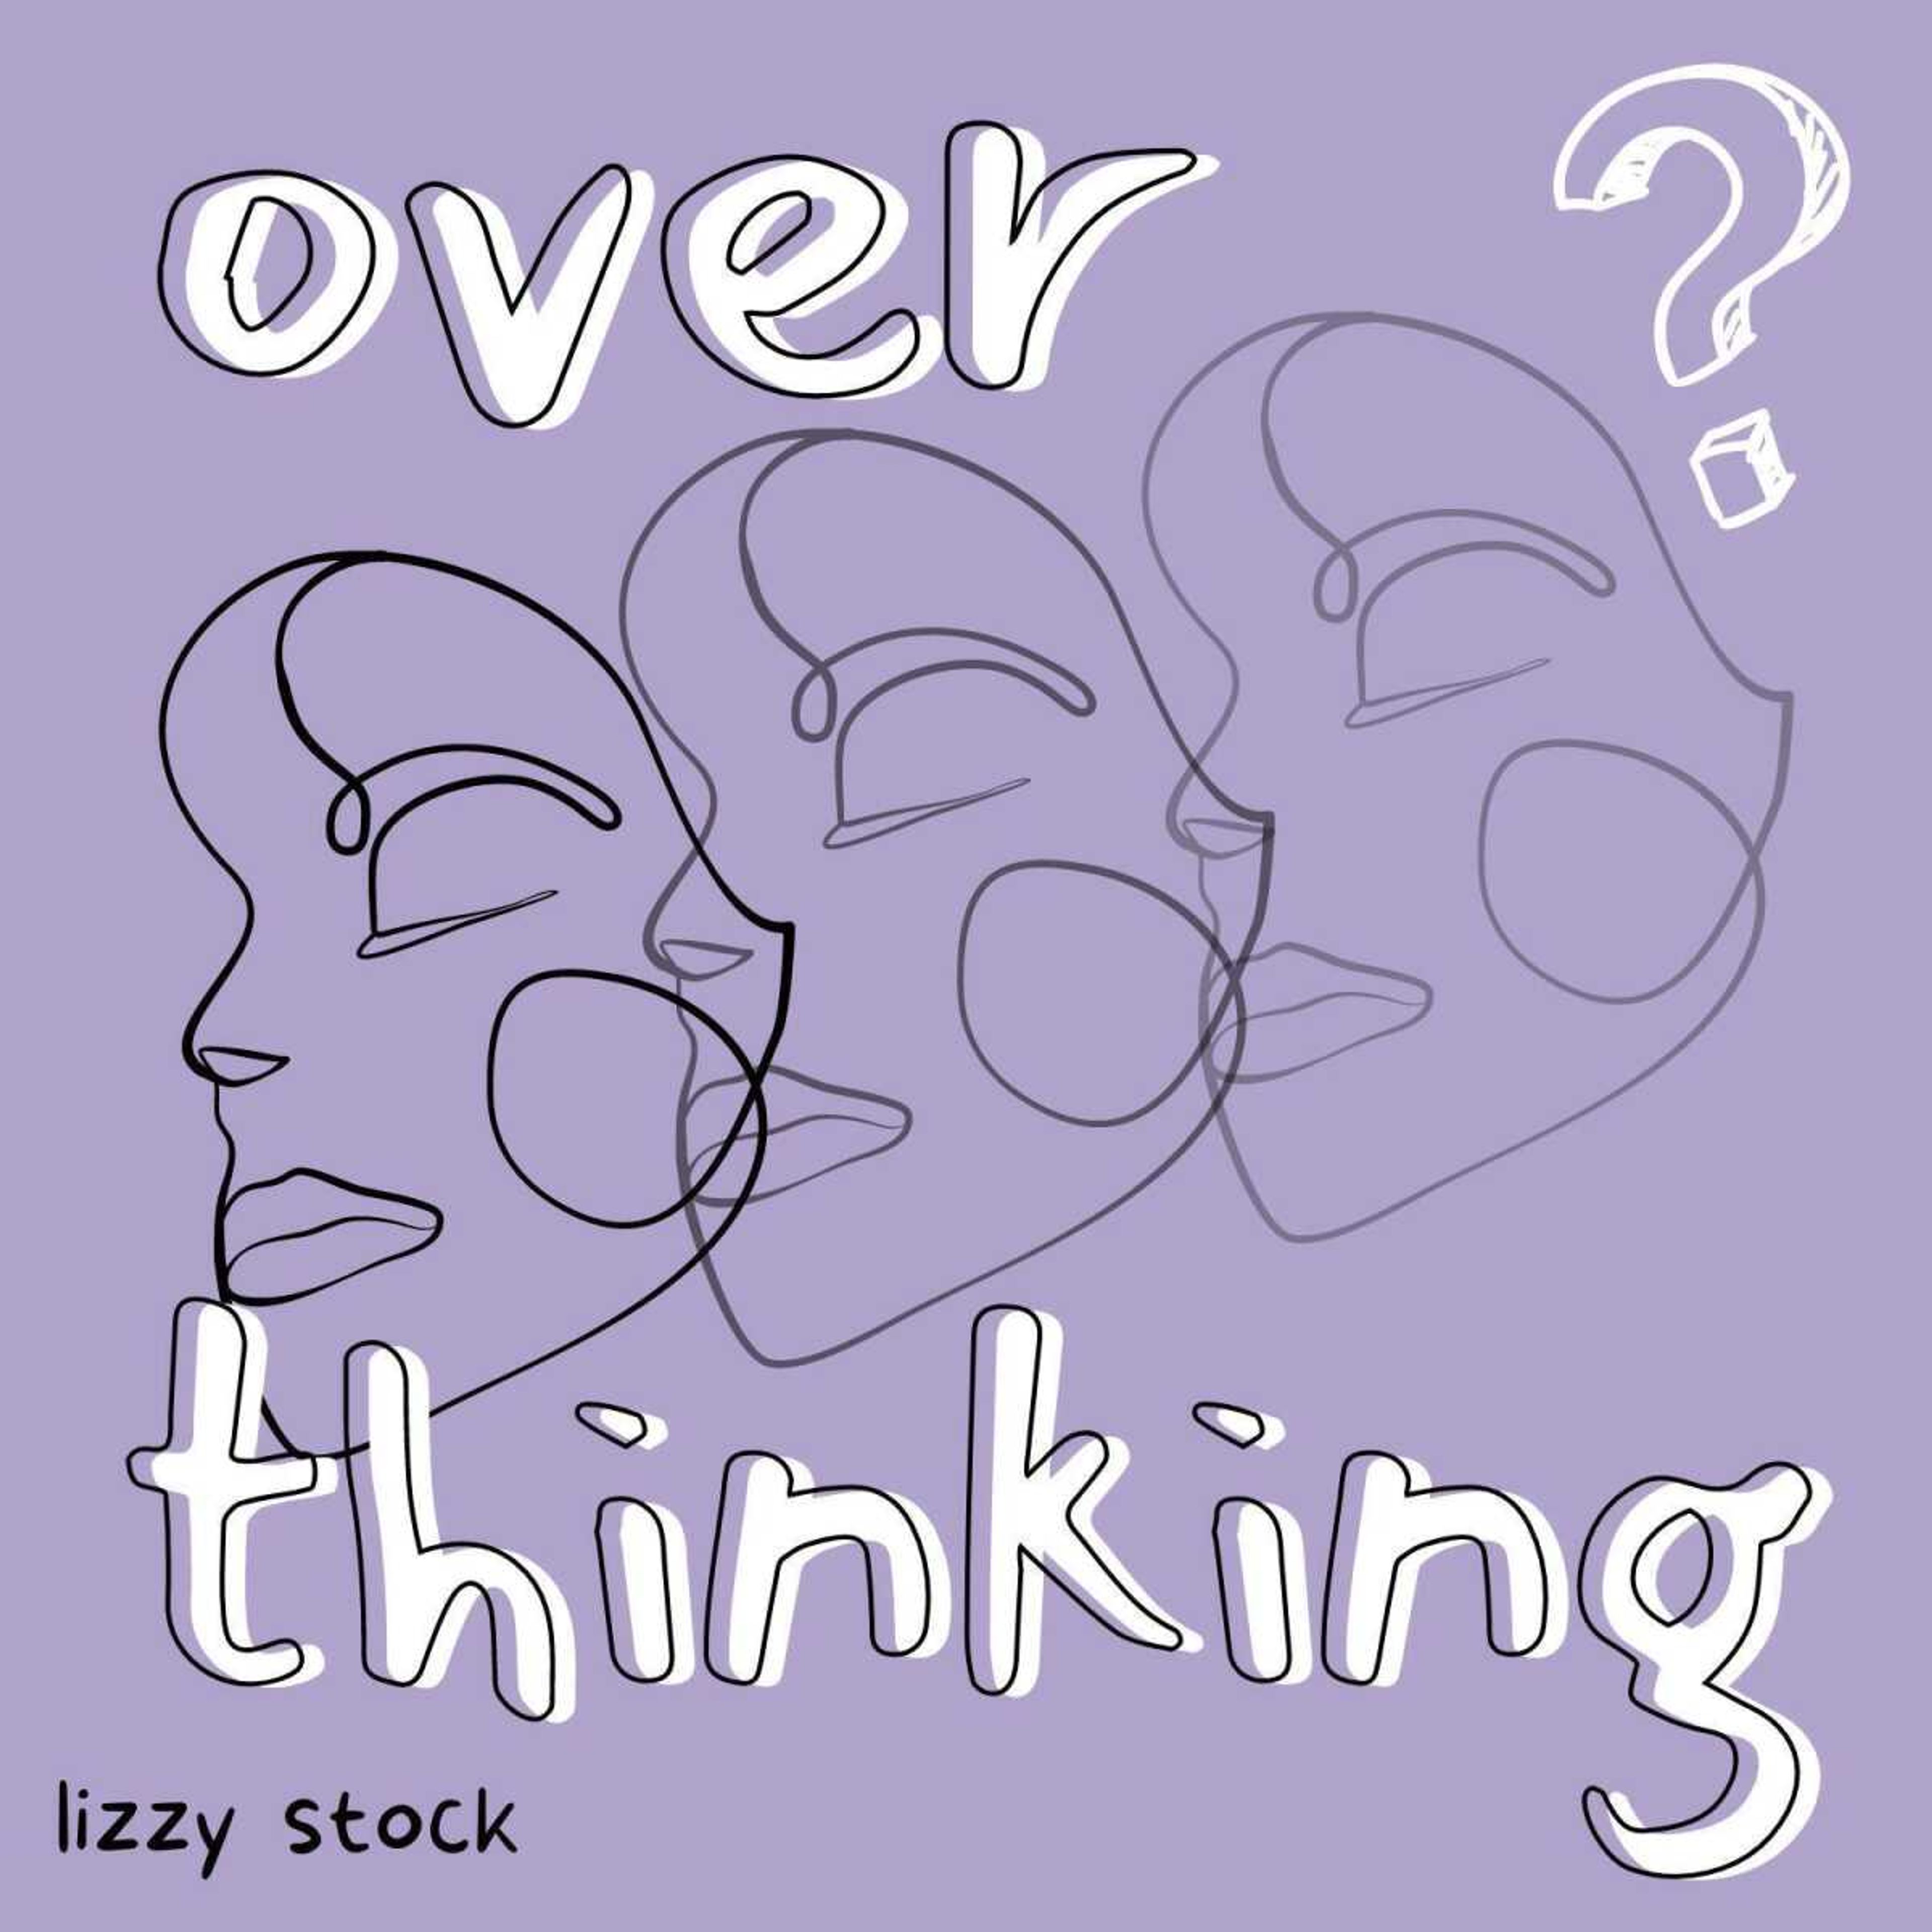 Overthinking: Notes from an ex-angsty teenager